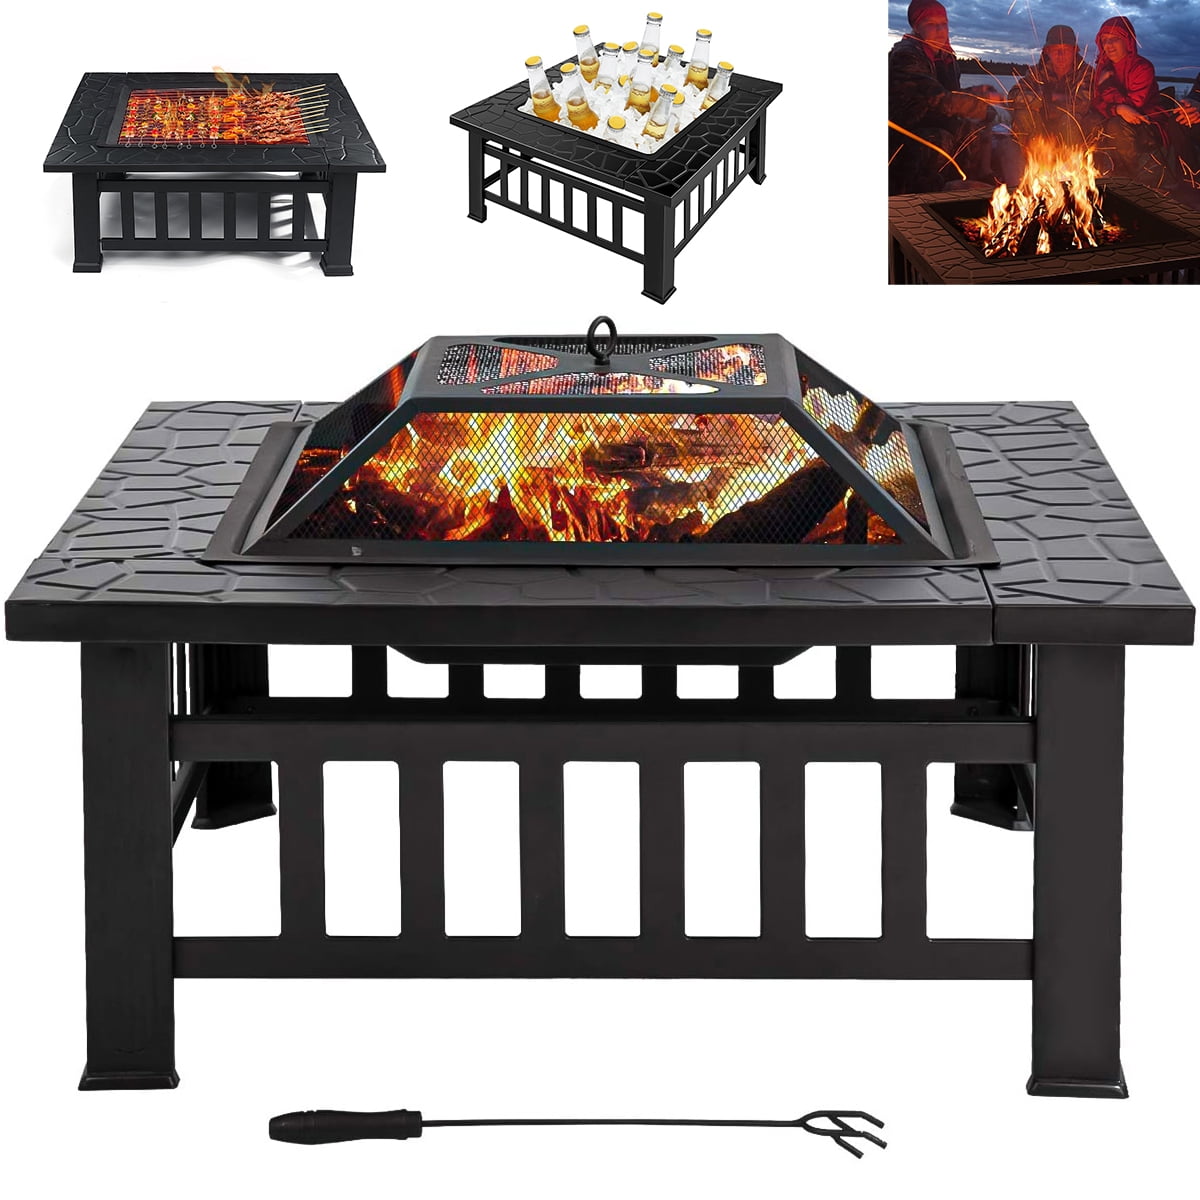 32 Inch Outdoor Metal Firepit Square, Fire Pit Safety Screen Material